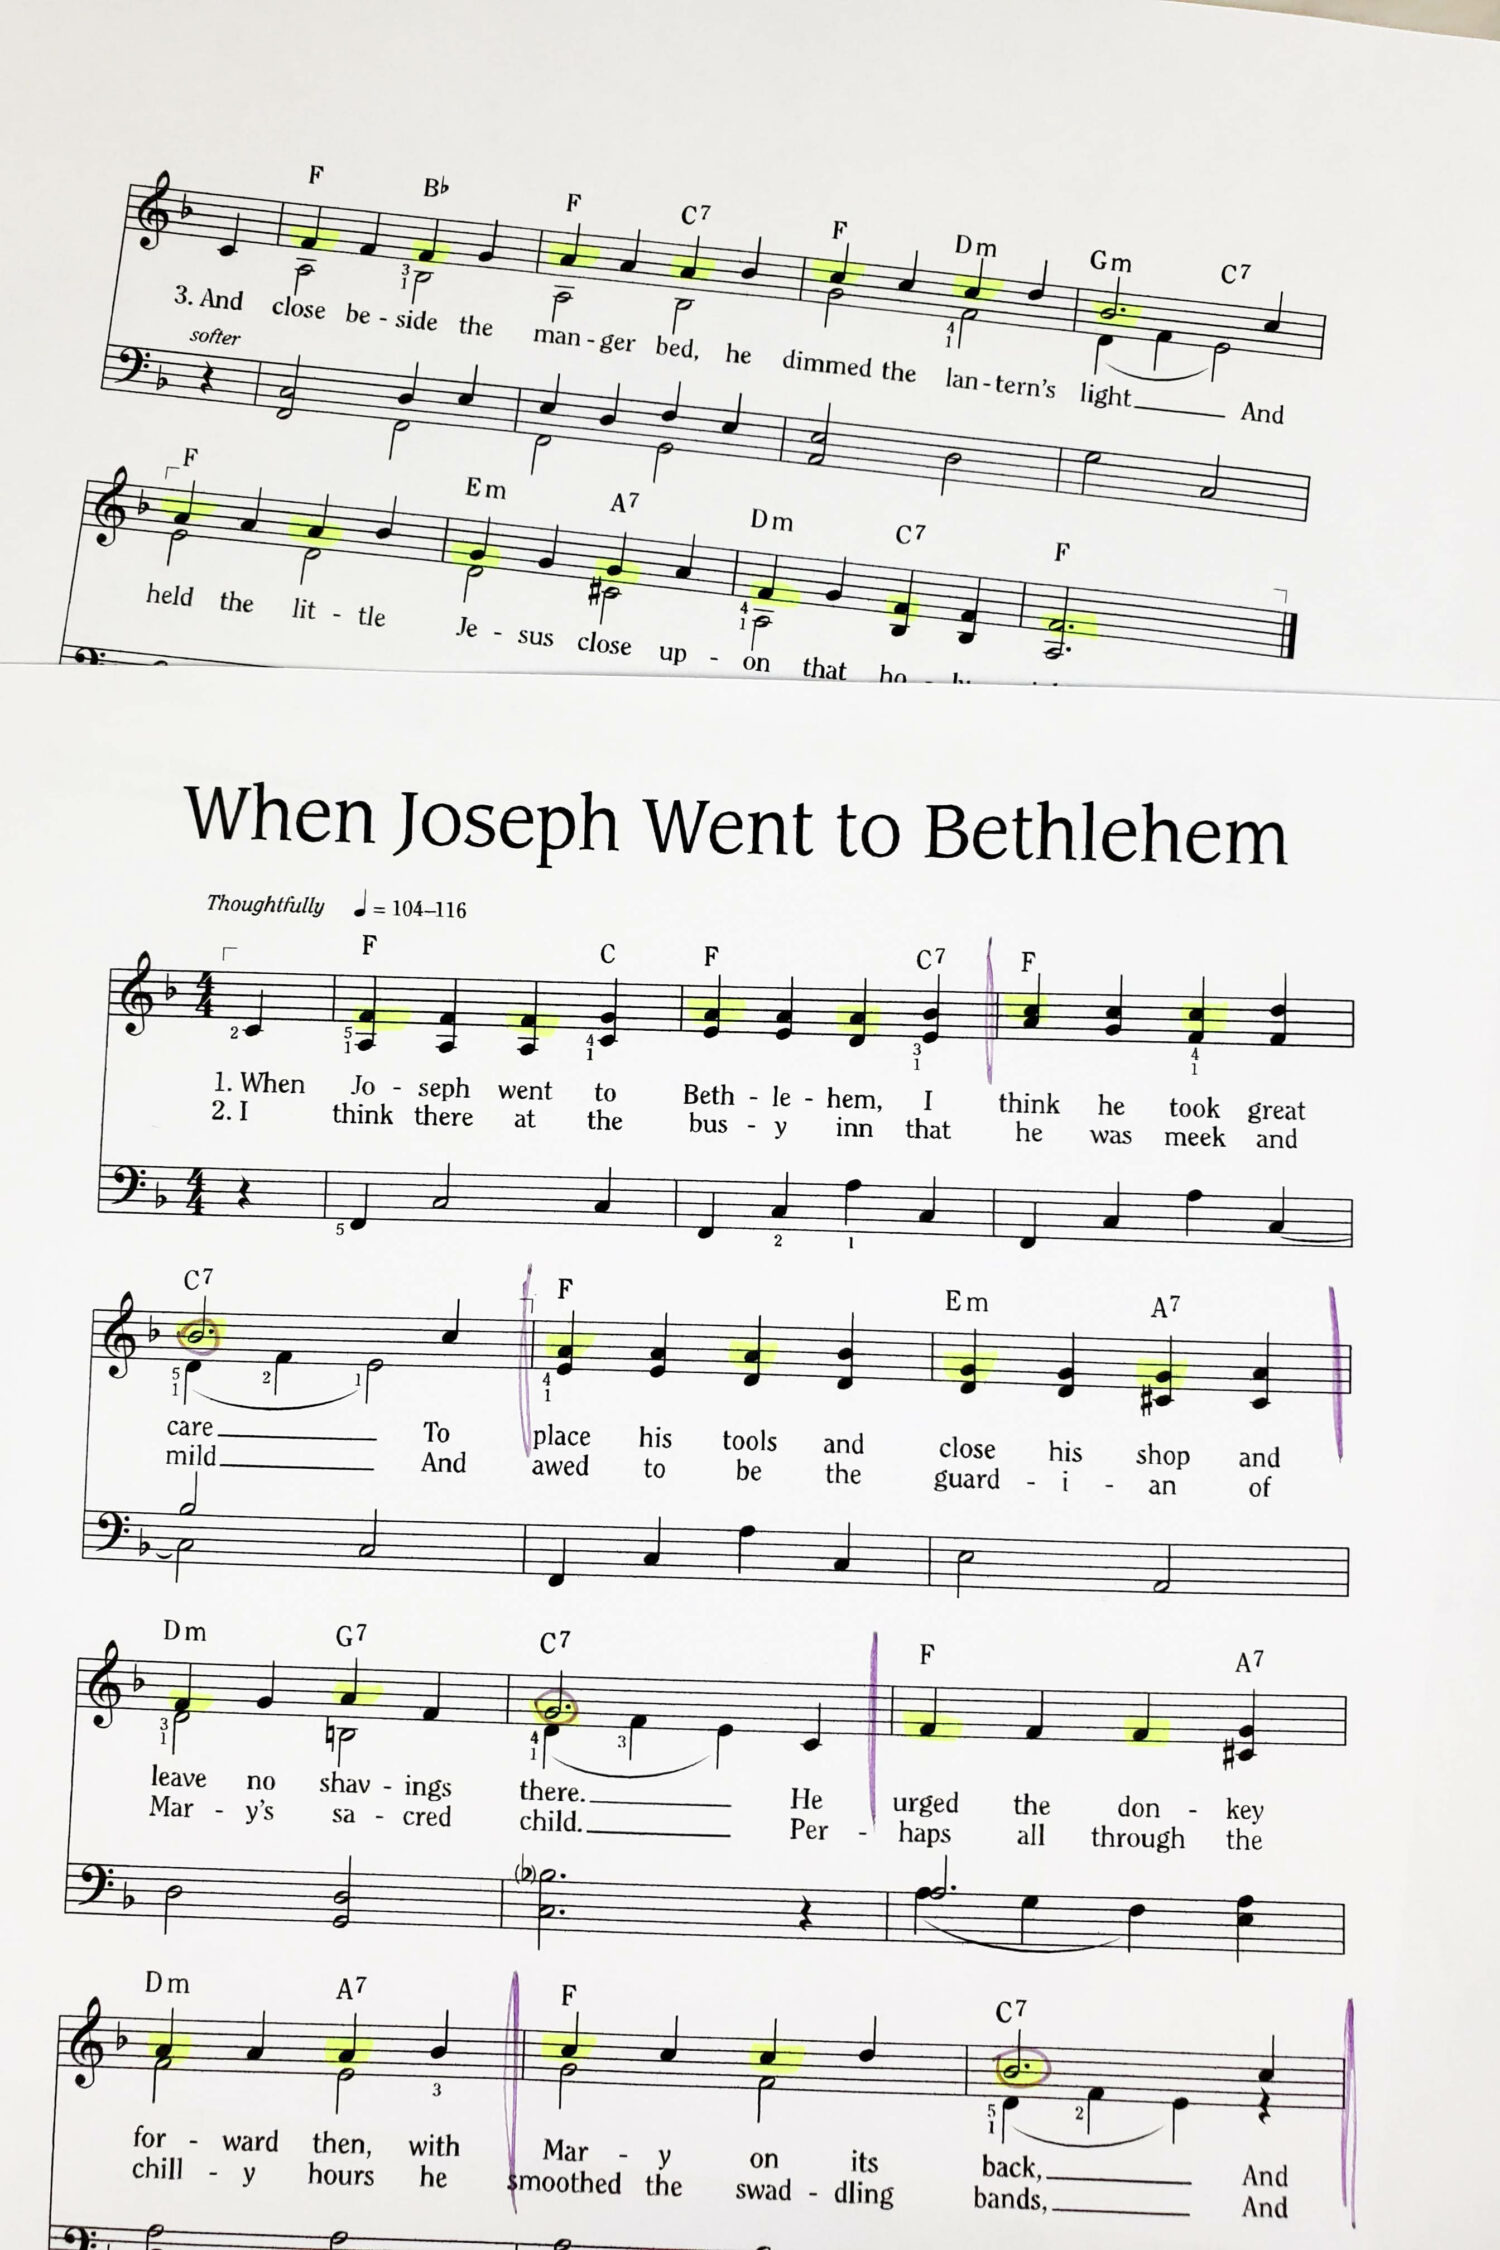 When Joseph Went to Bethlehem Chimes chart singing time idea! Head over to grab this printable chime charts to help teach the LDS Christmas song When Joseph Went to Bethlehem in your Primary room! You'll love using chimes for the Christmas season.